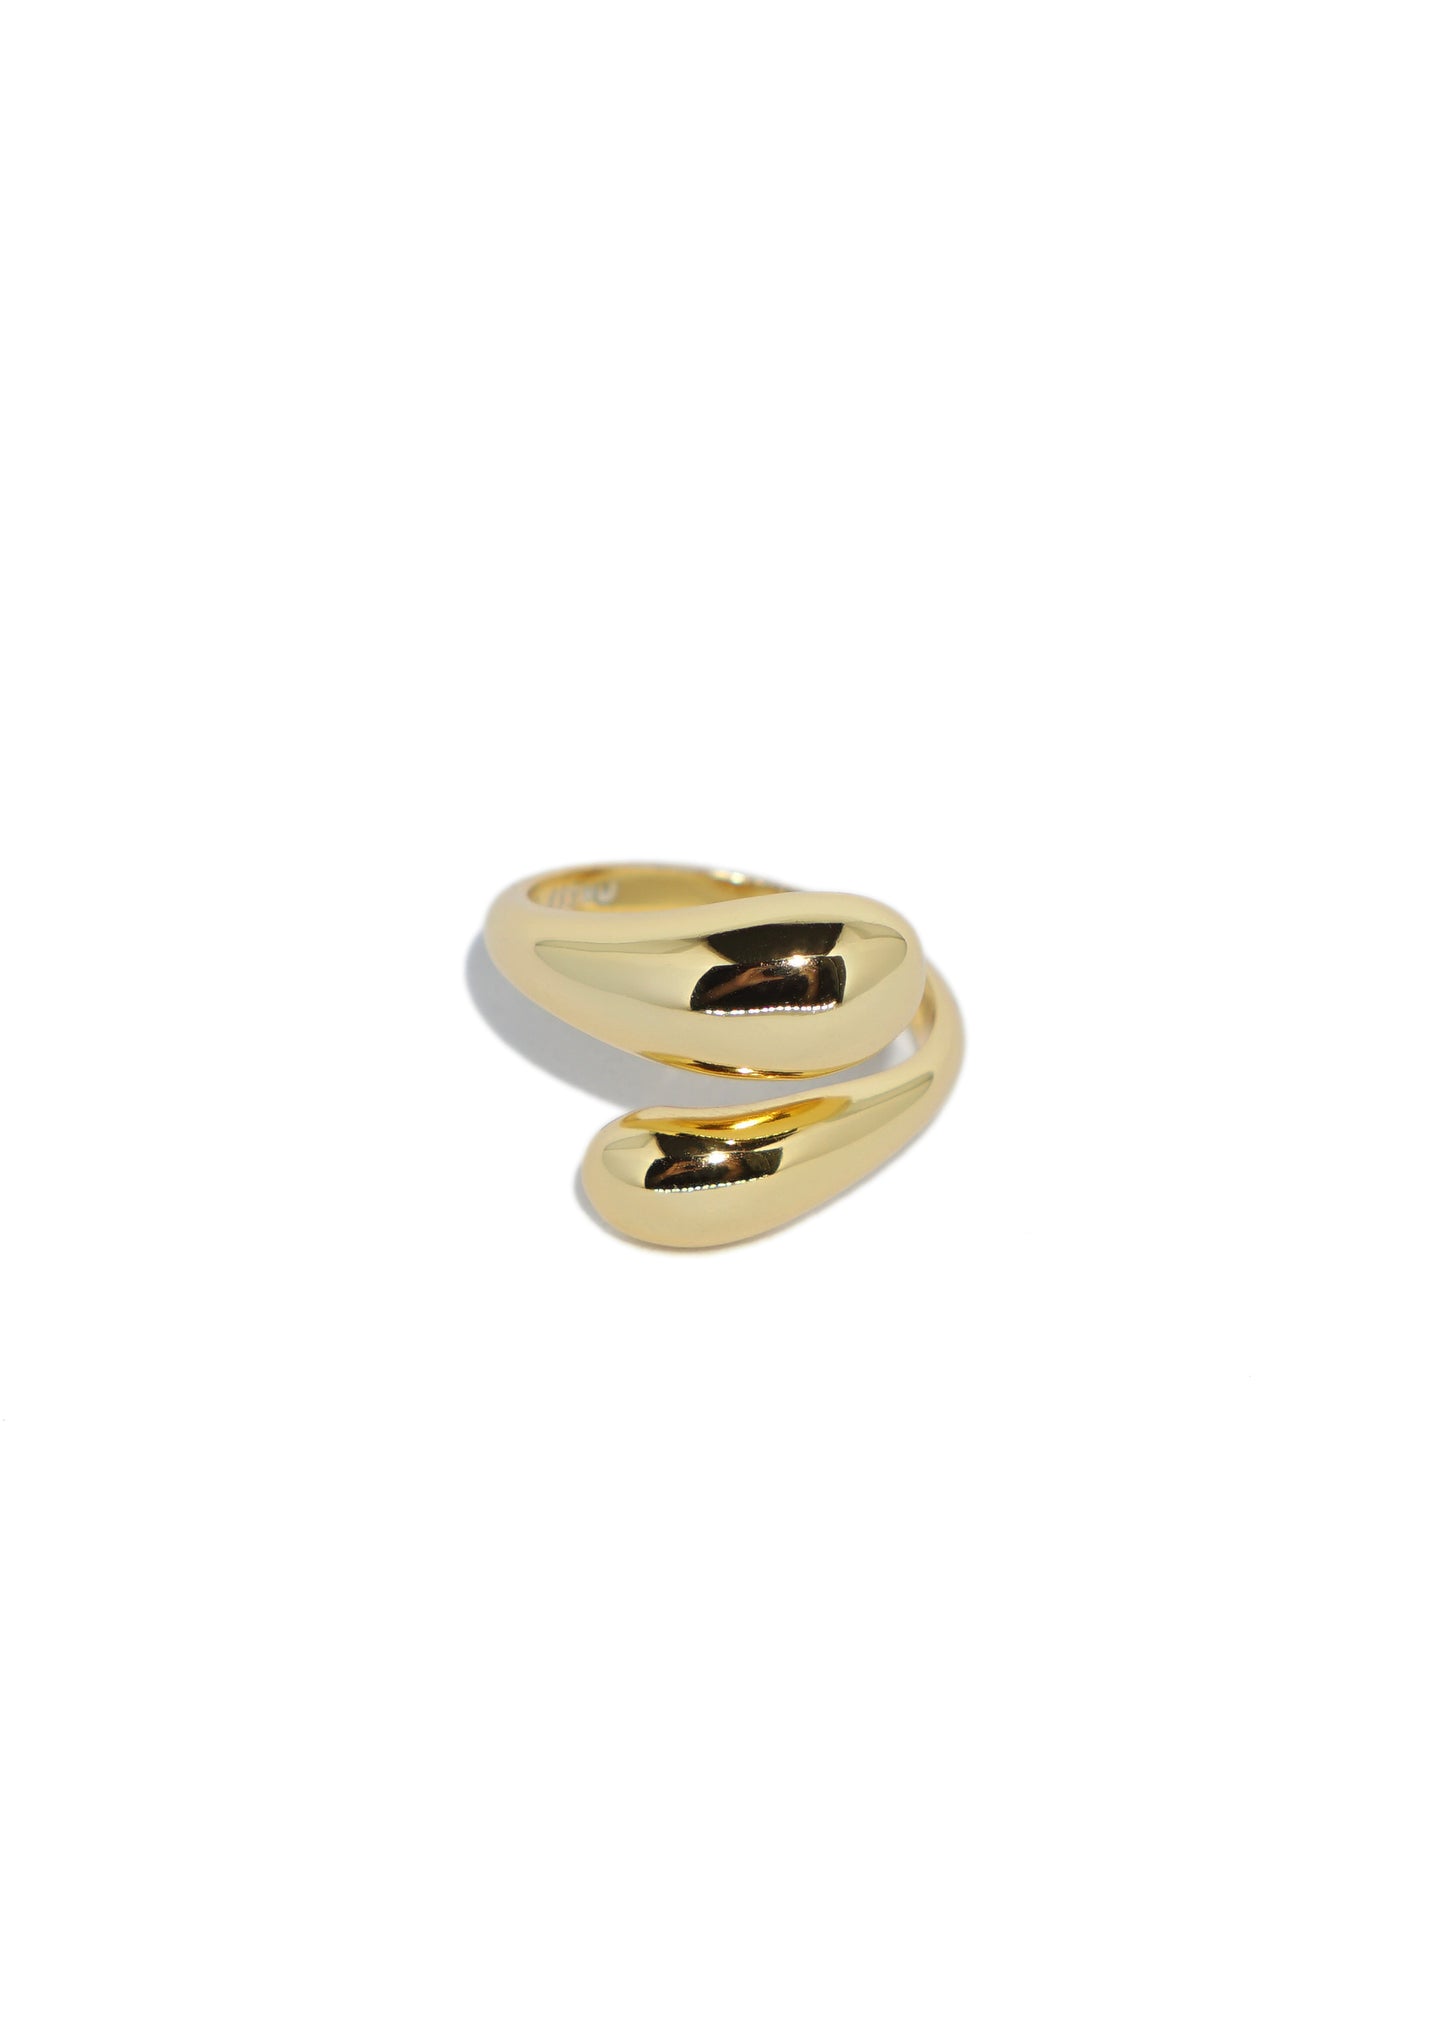 Furi Gold Ring - Catalog - Front View